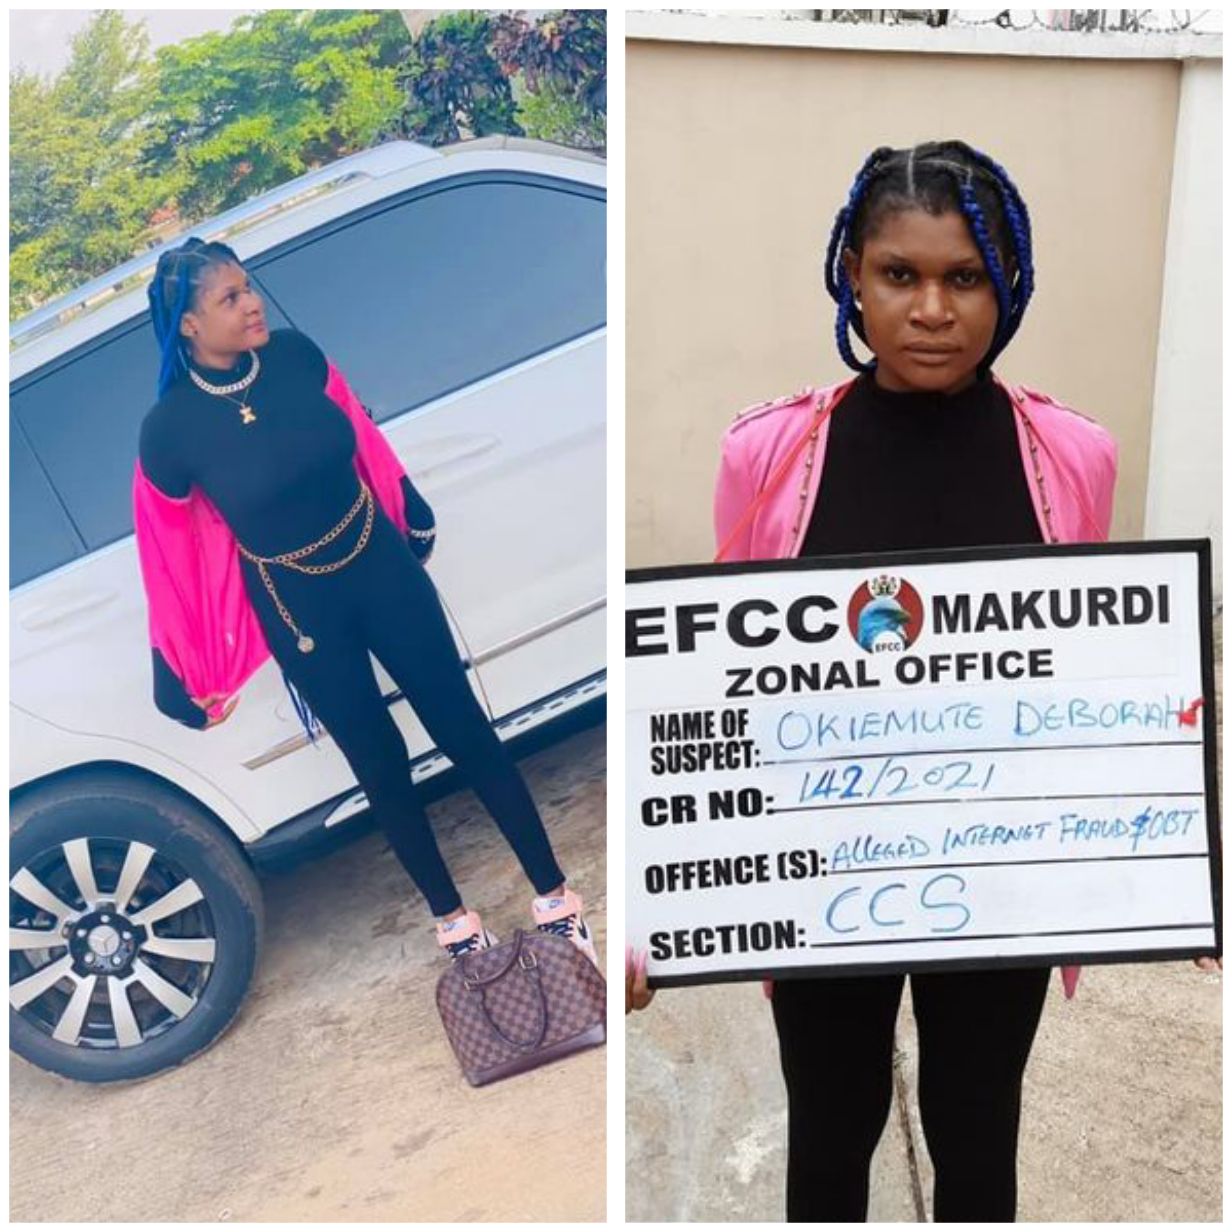 Nigerian lady arrested by EFCC for internet fraud shortly after welcoming new month with 